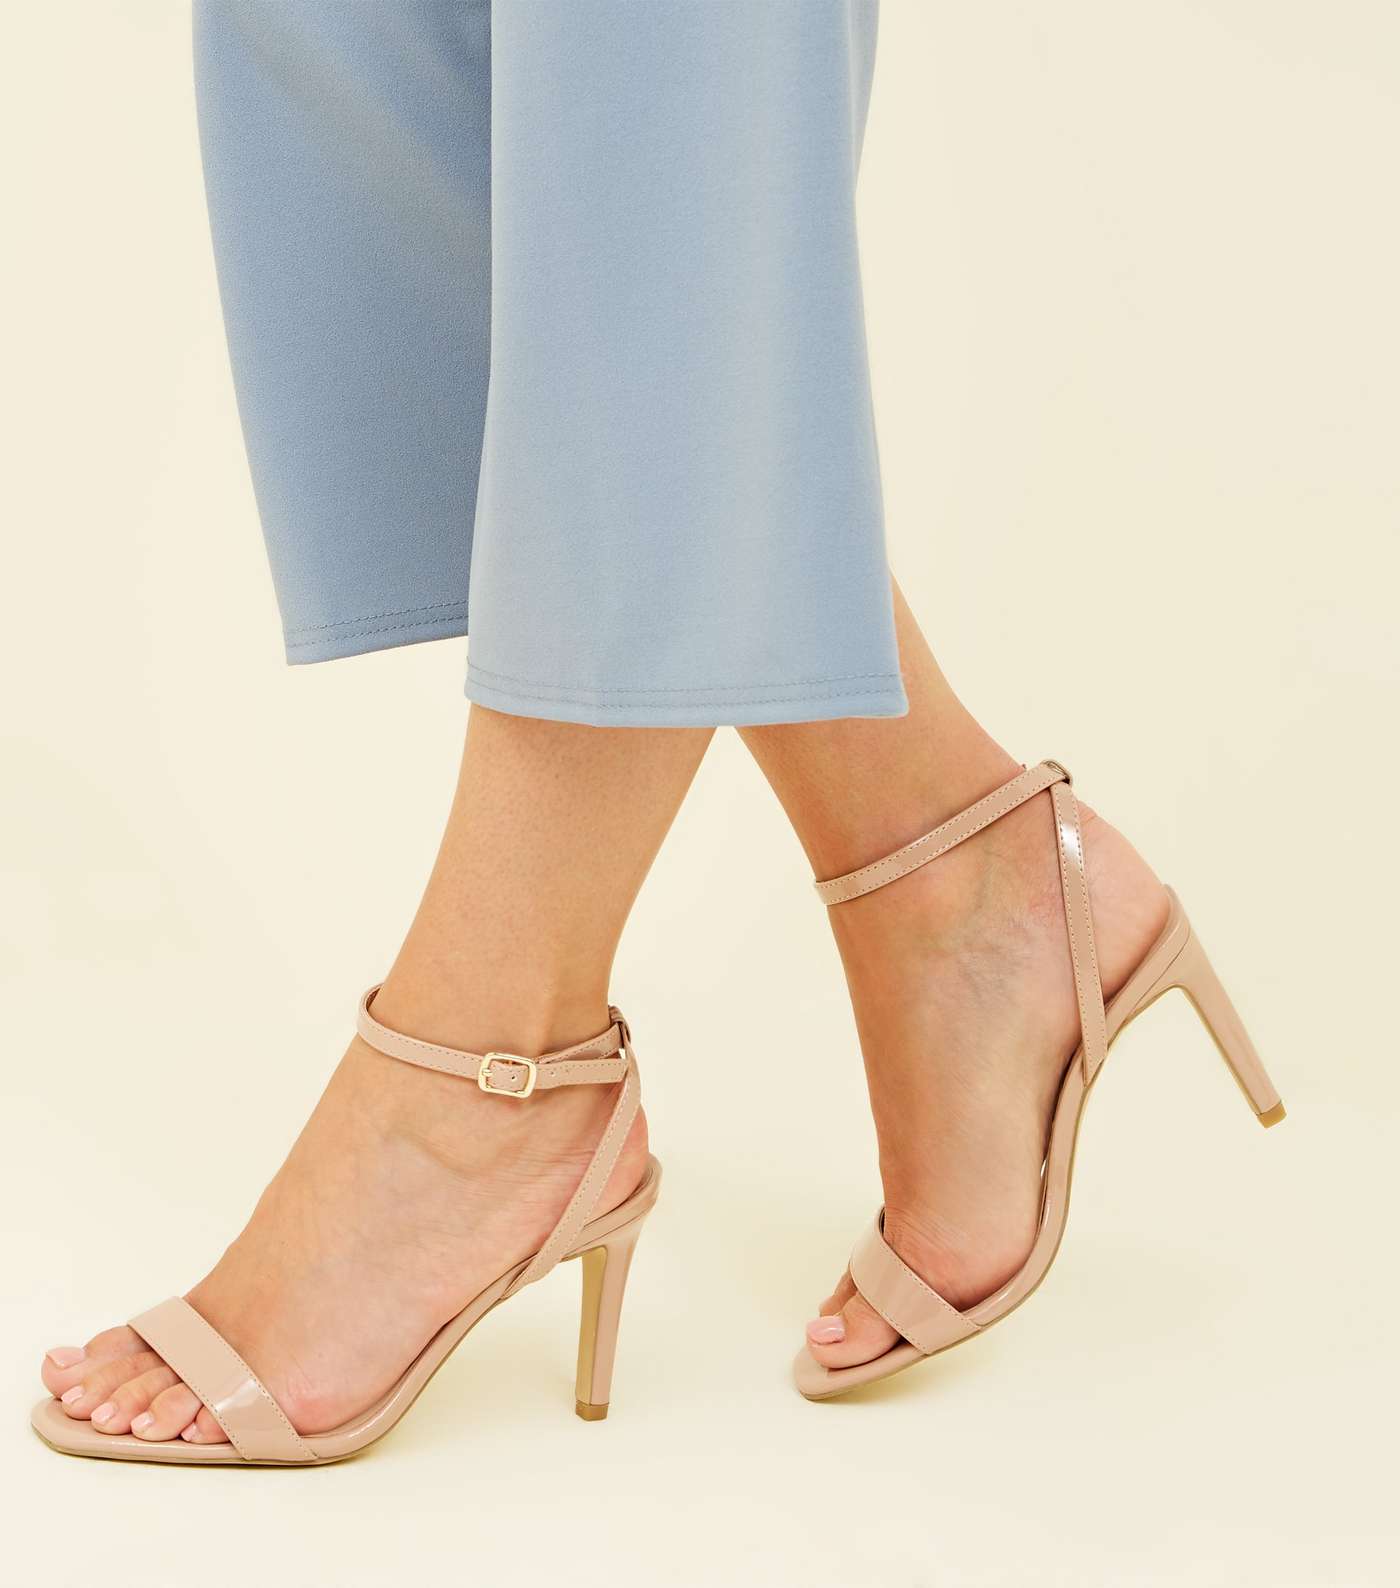 Wide Fit Nude Patent Square Toe Heels Image 5